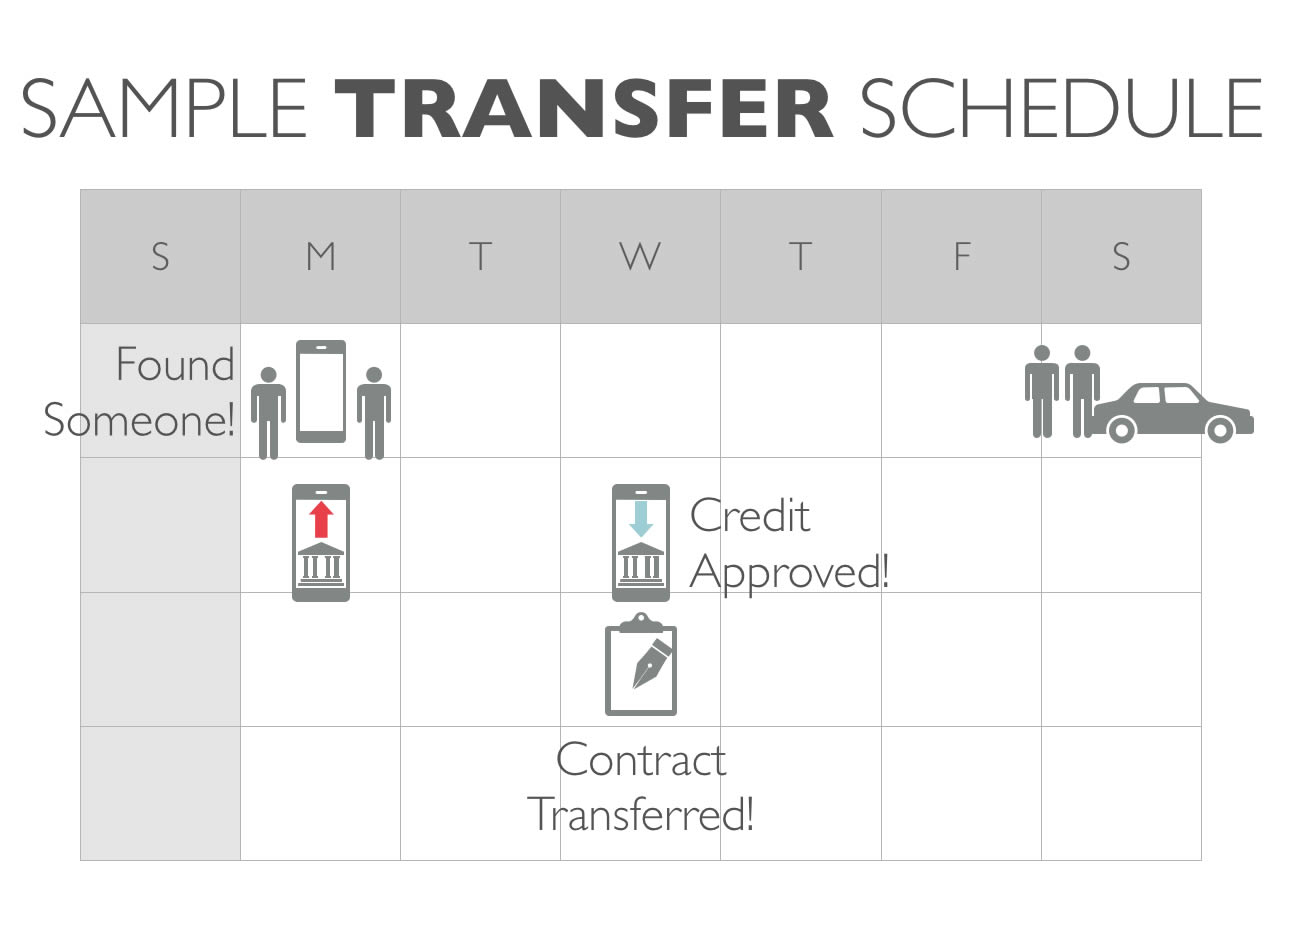 Lease Takeover: Transfer Before the Next Payment - Step 1